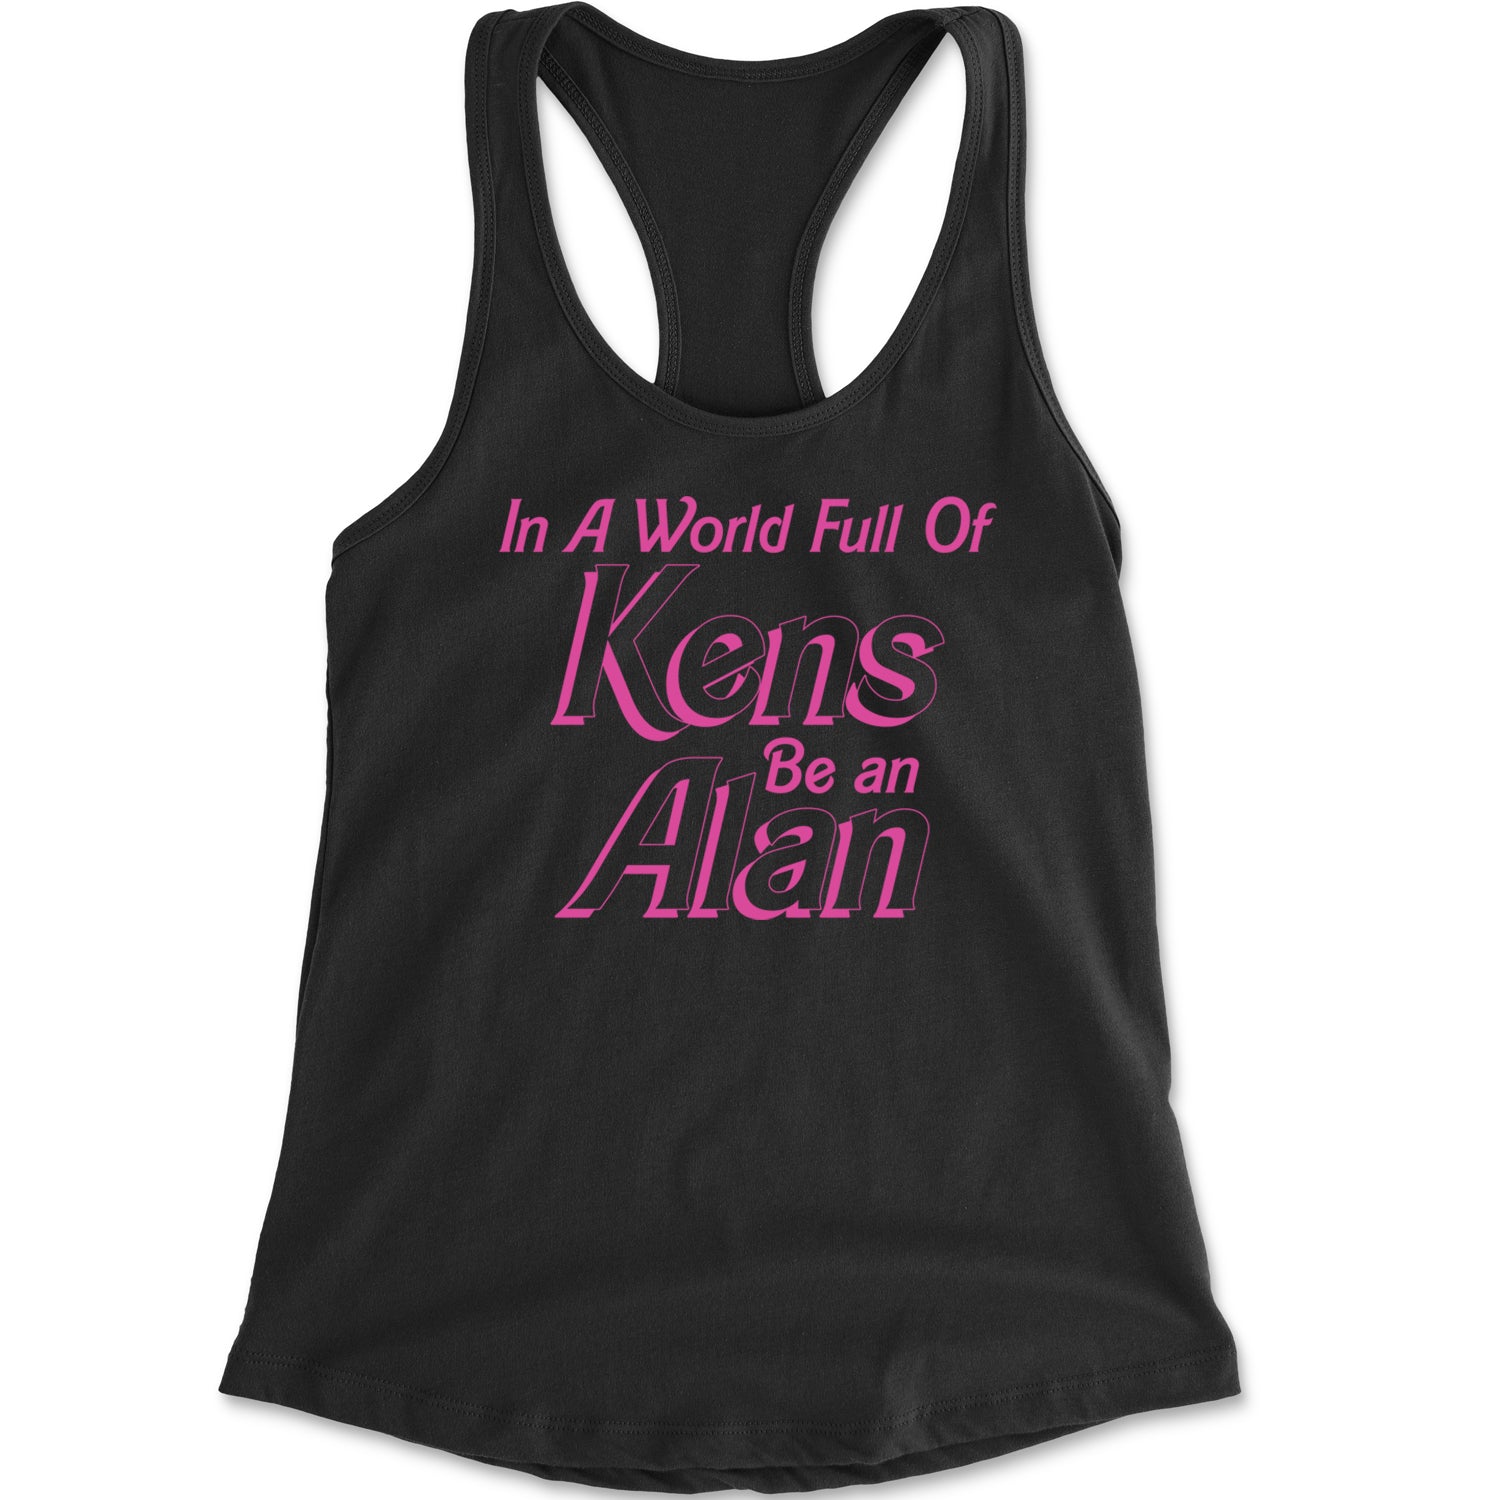 In A World Full Of Kens, Be an Alan Racerback Tank Top for Women